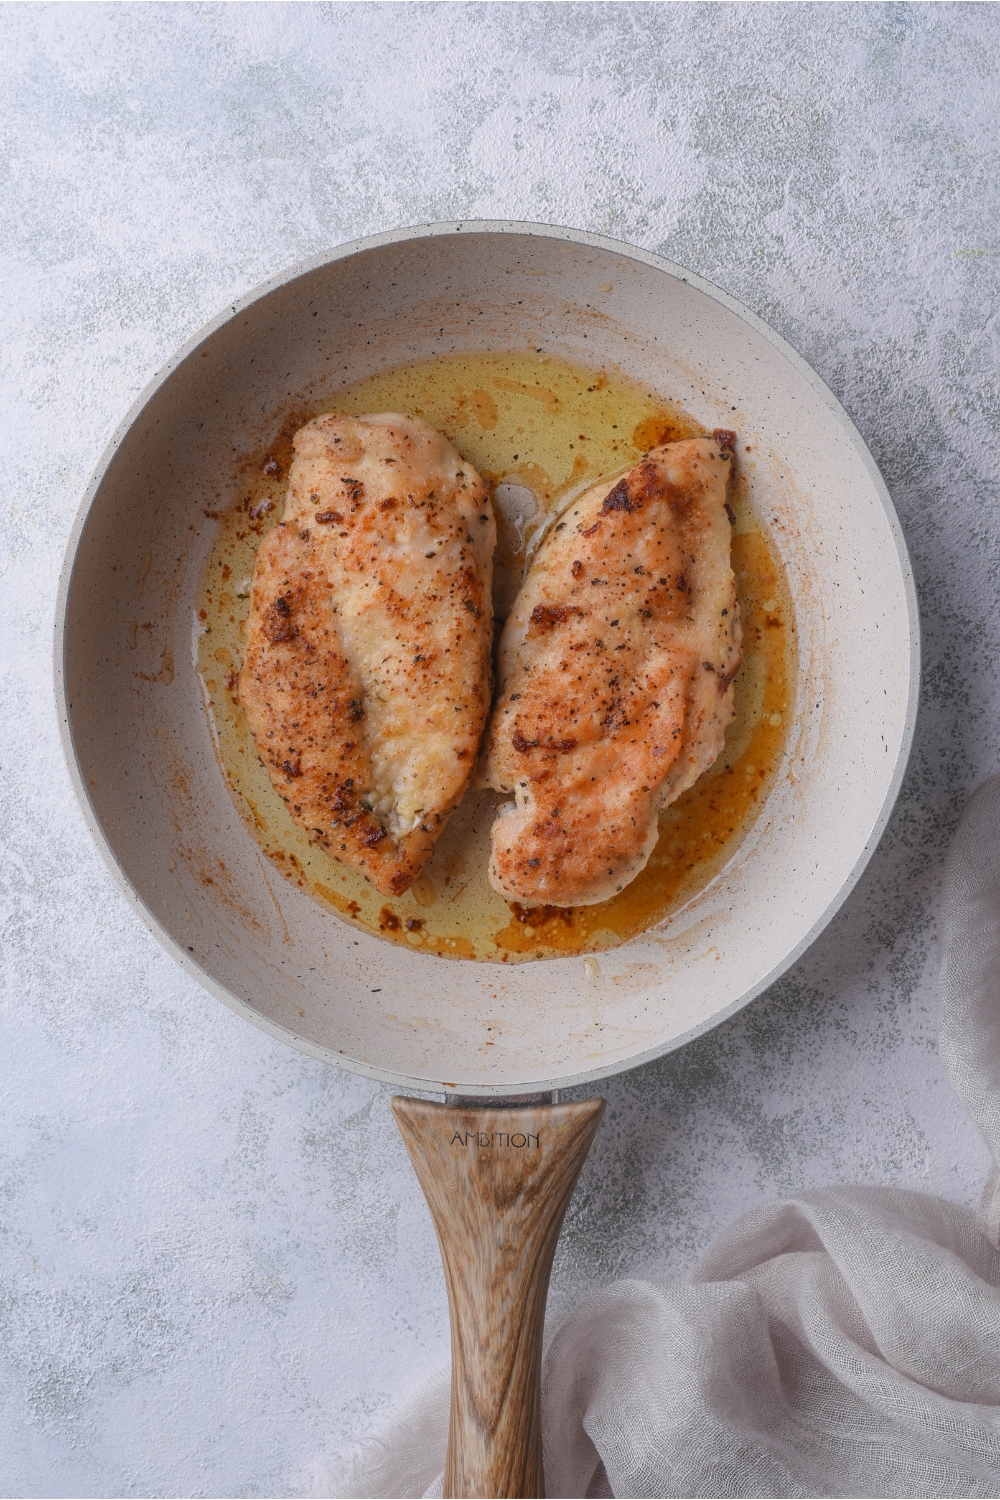 A grey skillet with a wooden handle and two seasoned and pan-fried chicken breasts in it.